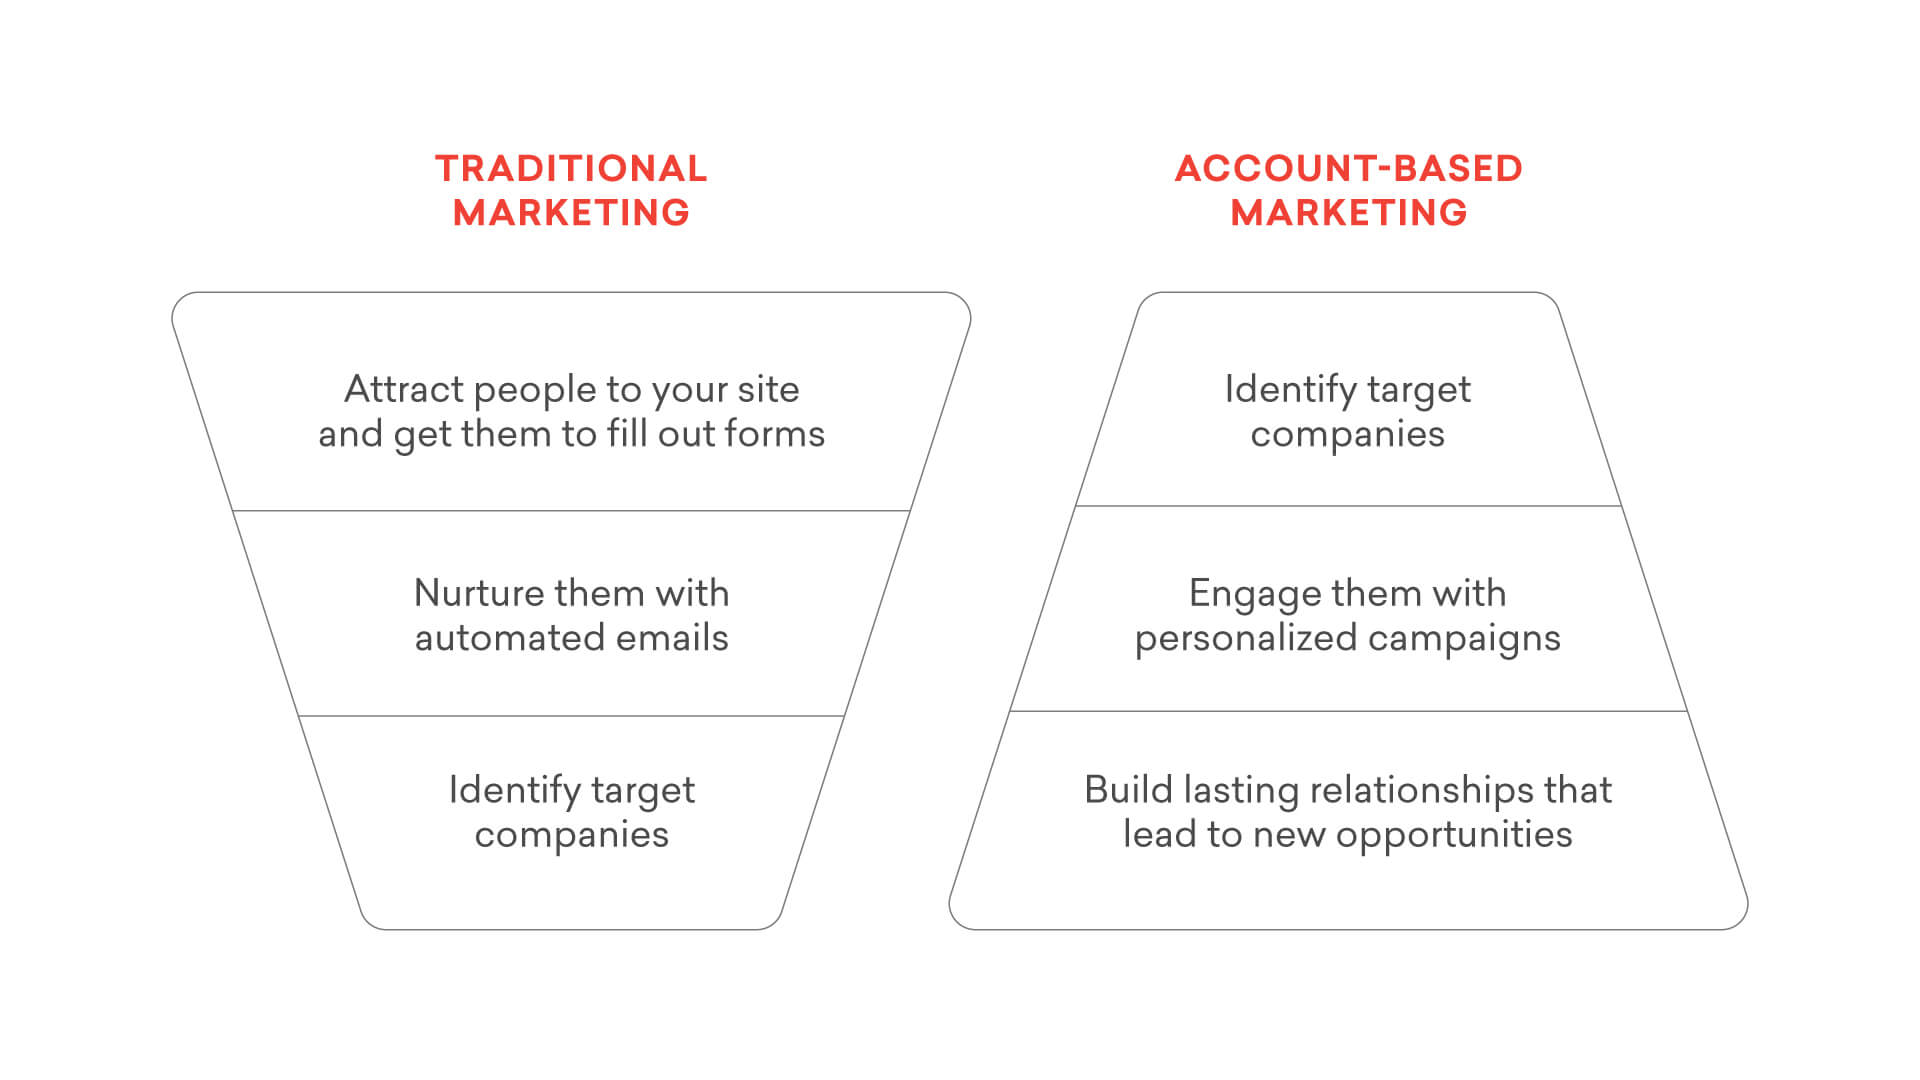 Difference between traditional and account-based marketing